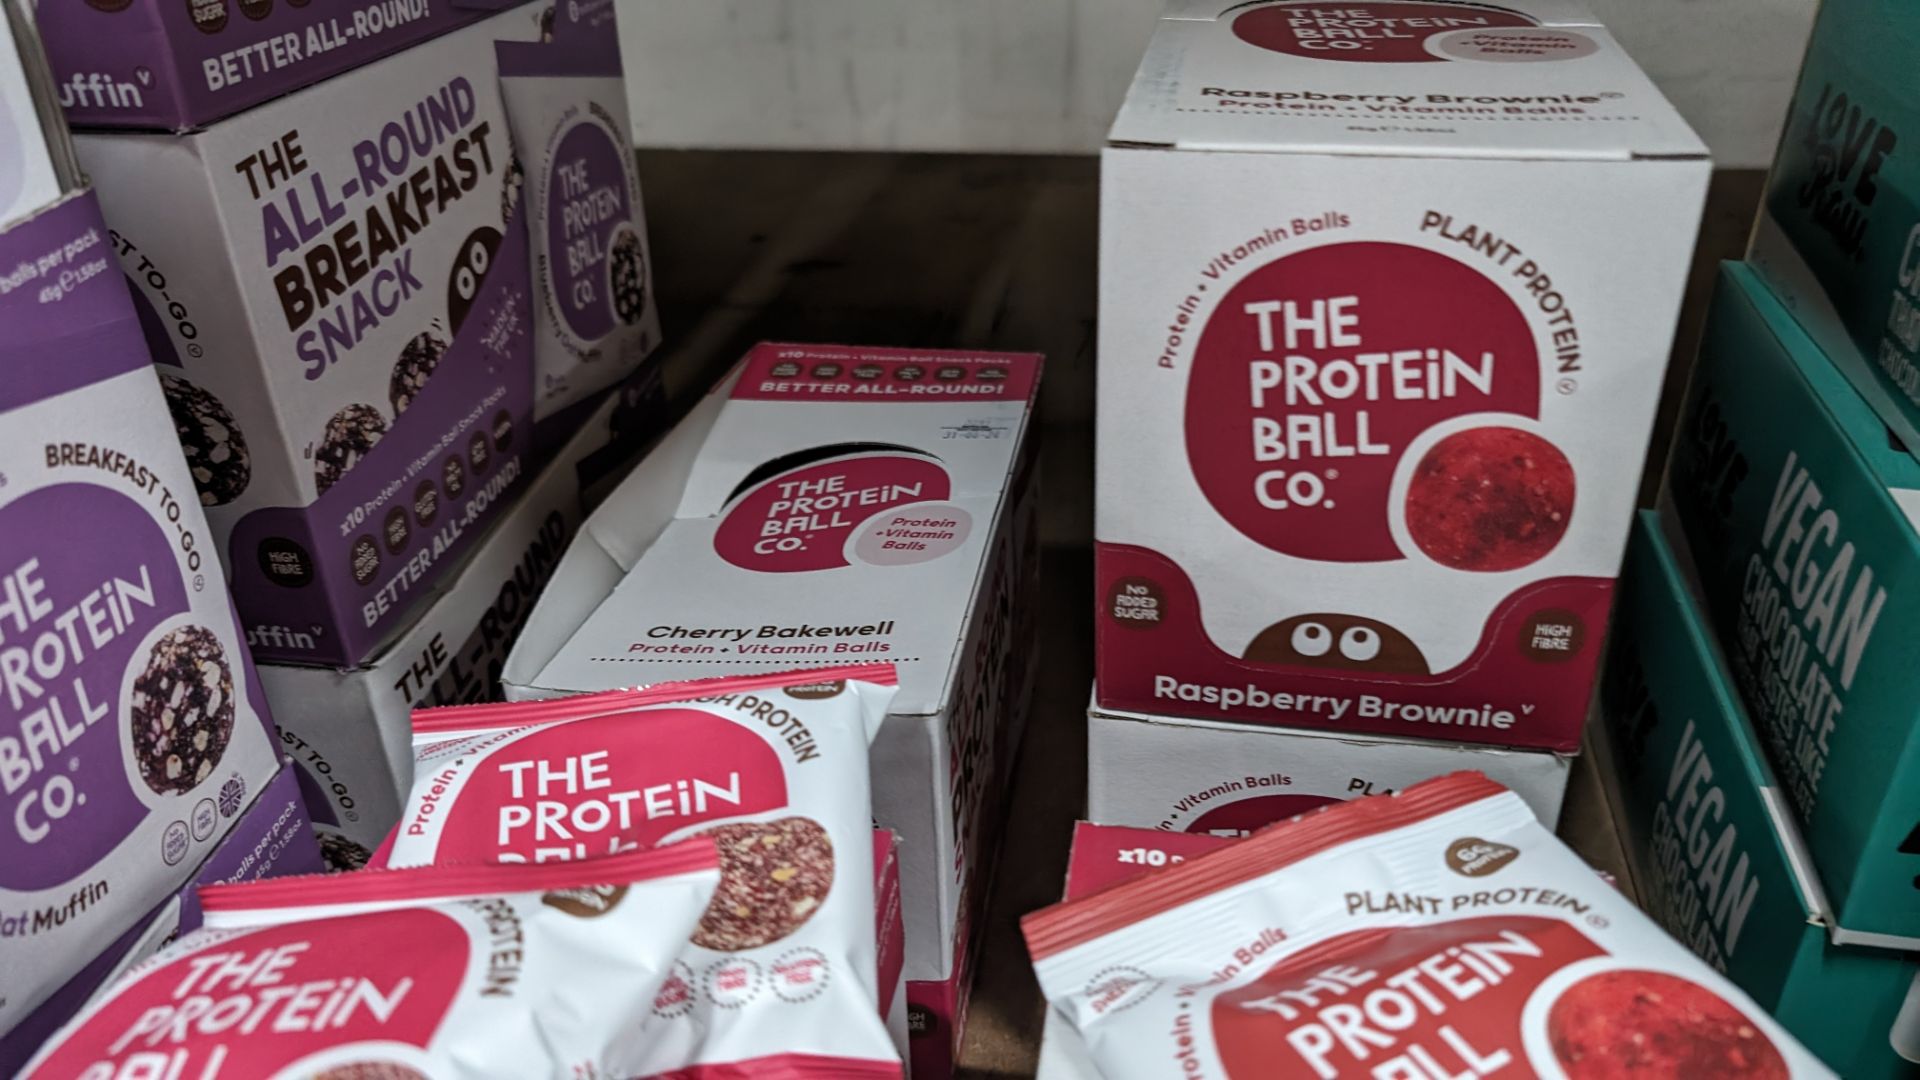 17 boxes of The Protein Ball Co breakfast to-go. Each box contains 10 snack packs although it shoul - Image 10 of 10